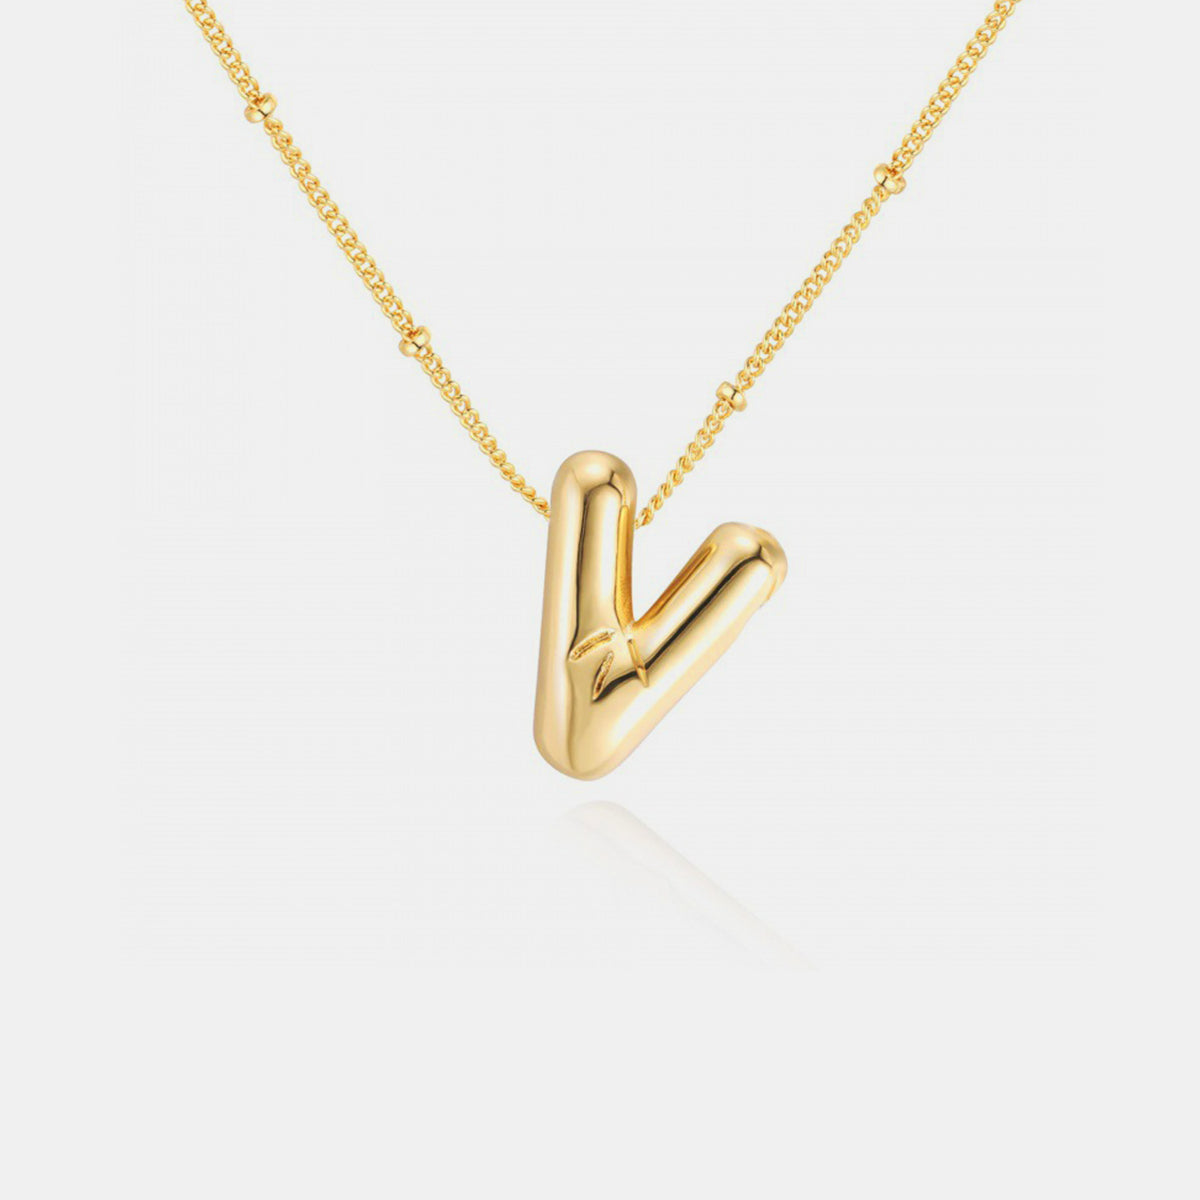 TEEK - T-Z Gold-Plated Letter Necklace JEWELRY TEEK Trend Style V  